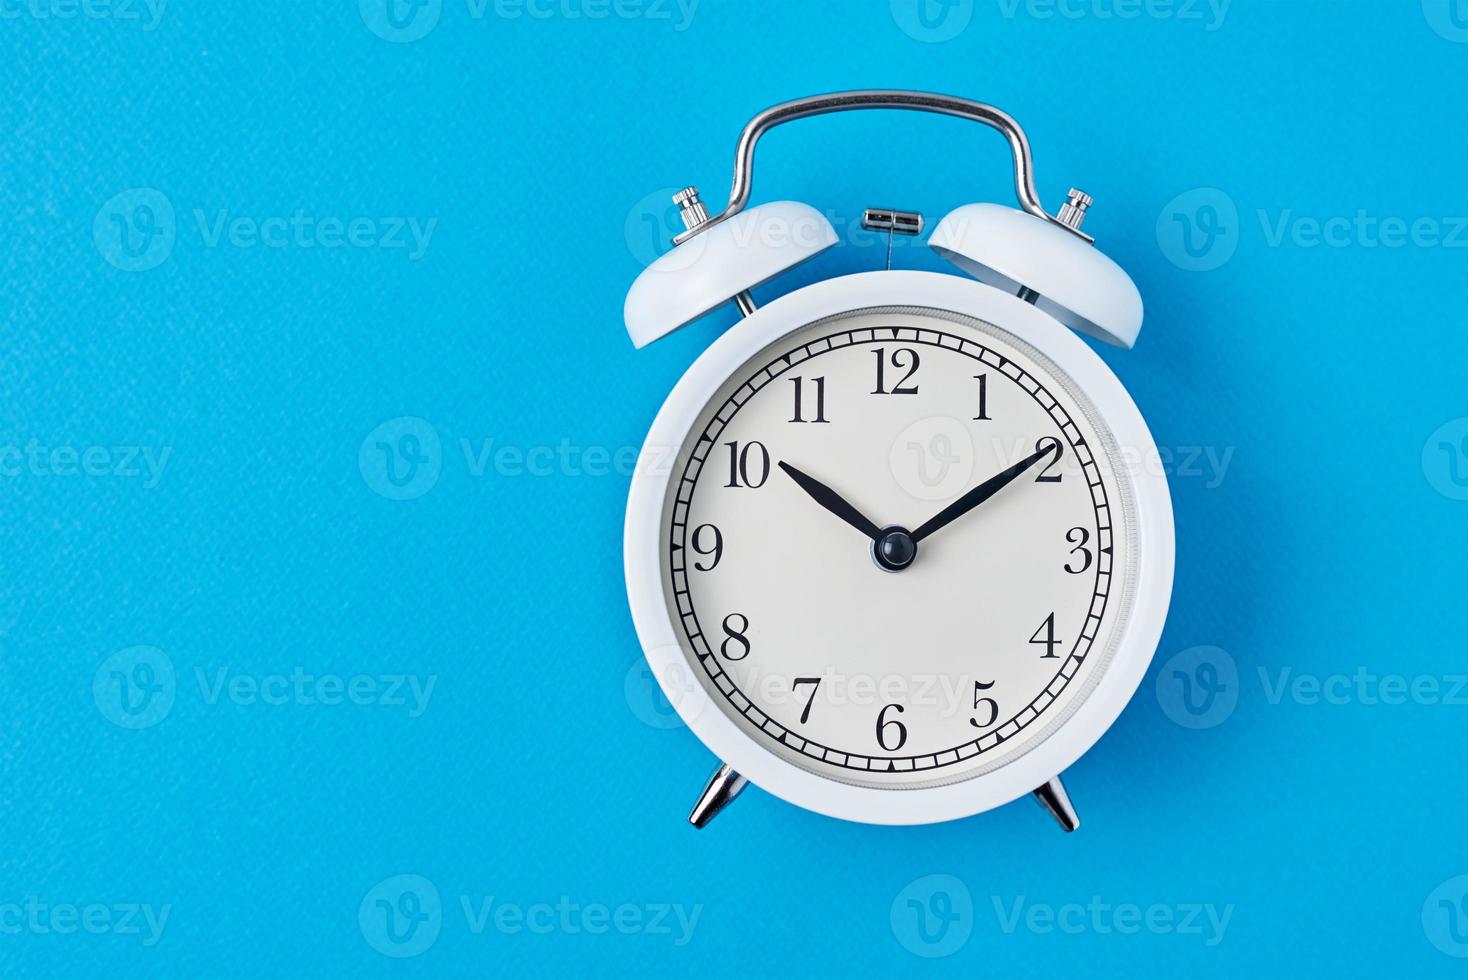 Vintage white alarm clock on the blue backround with copy space. Time concept photo